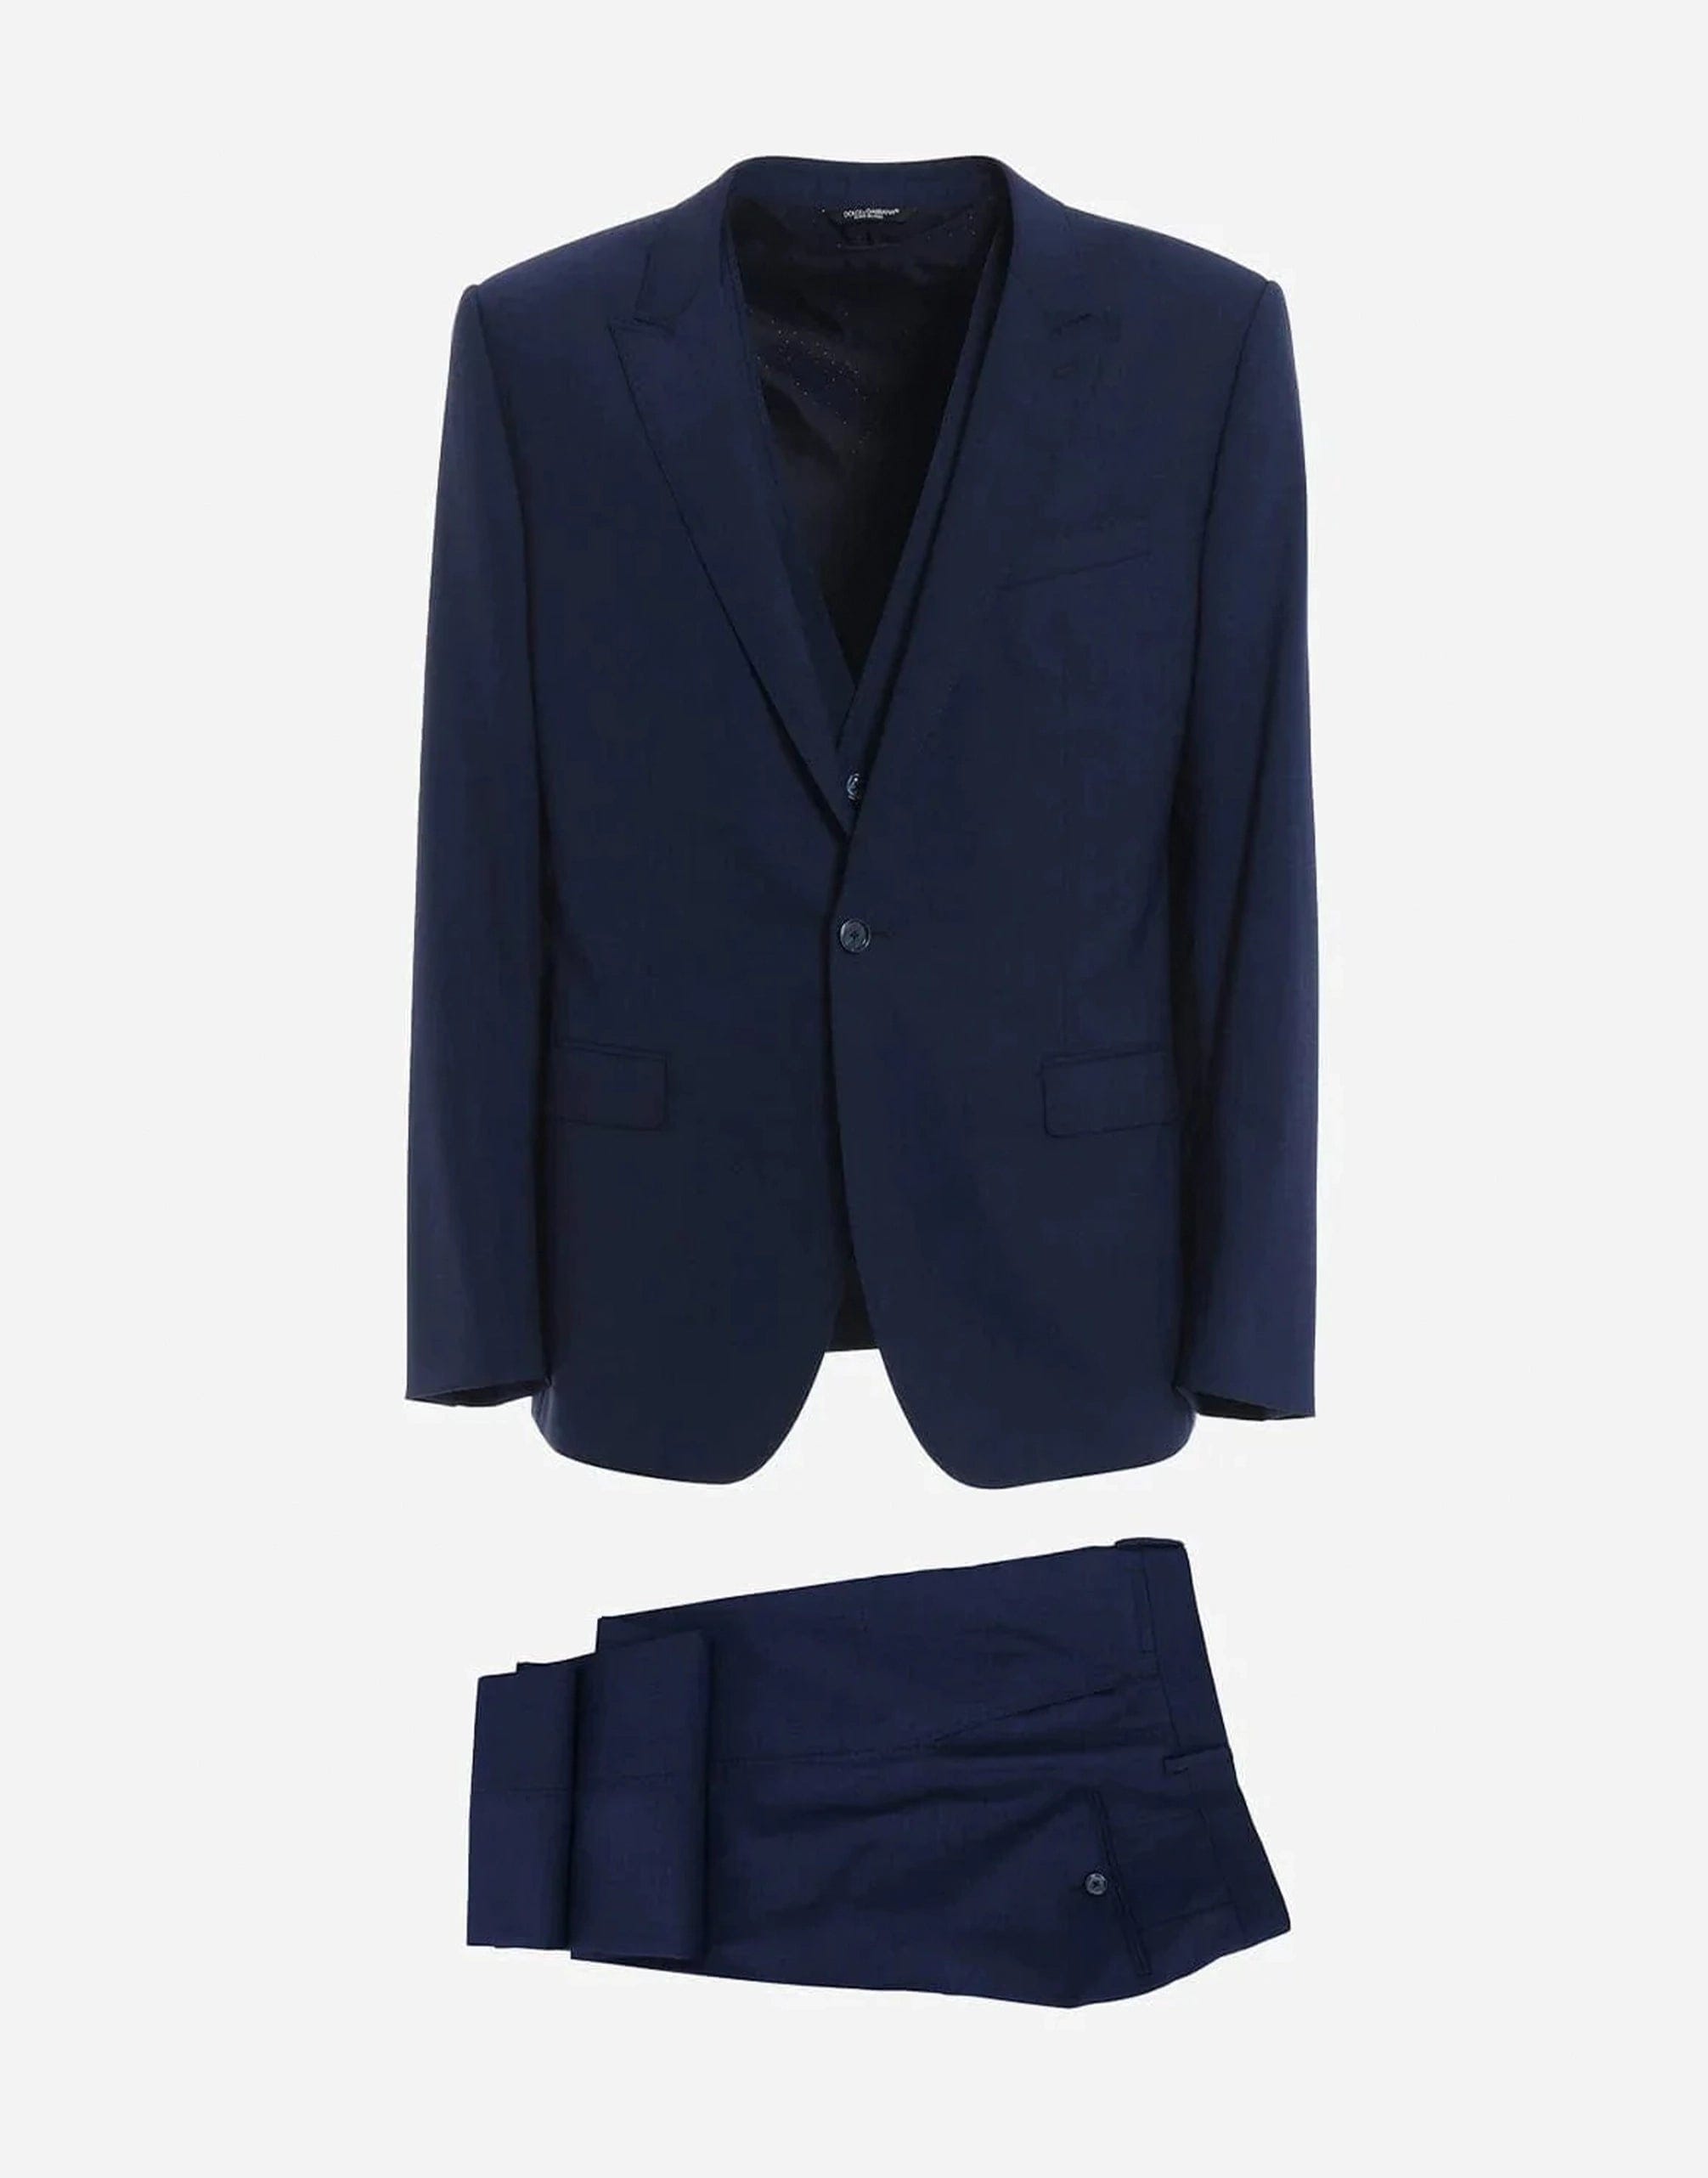 Dolce & Gabbana Wool Tailored Formal Suit